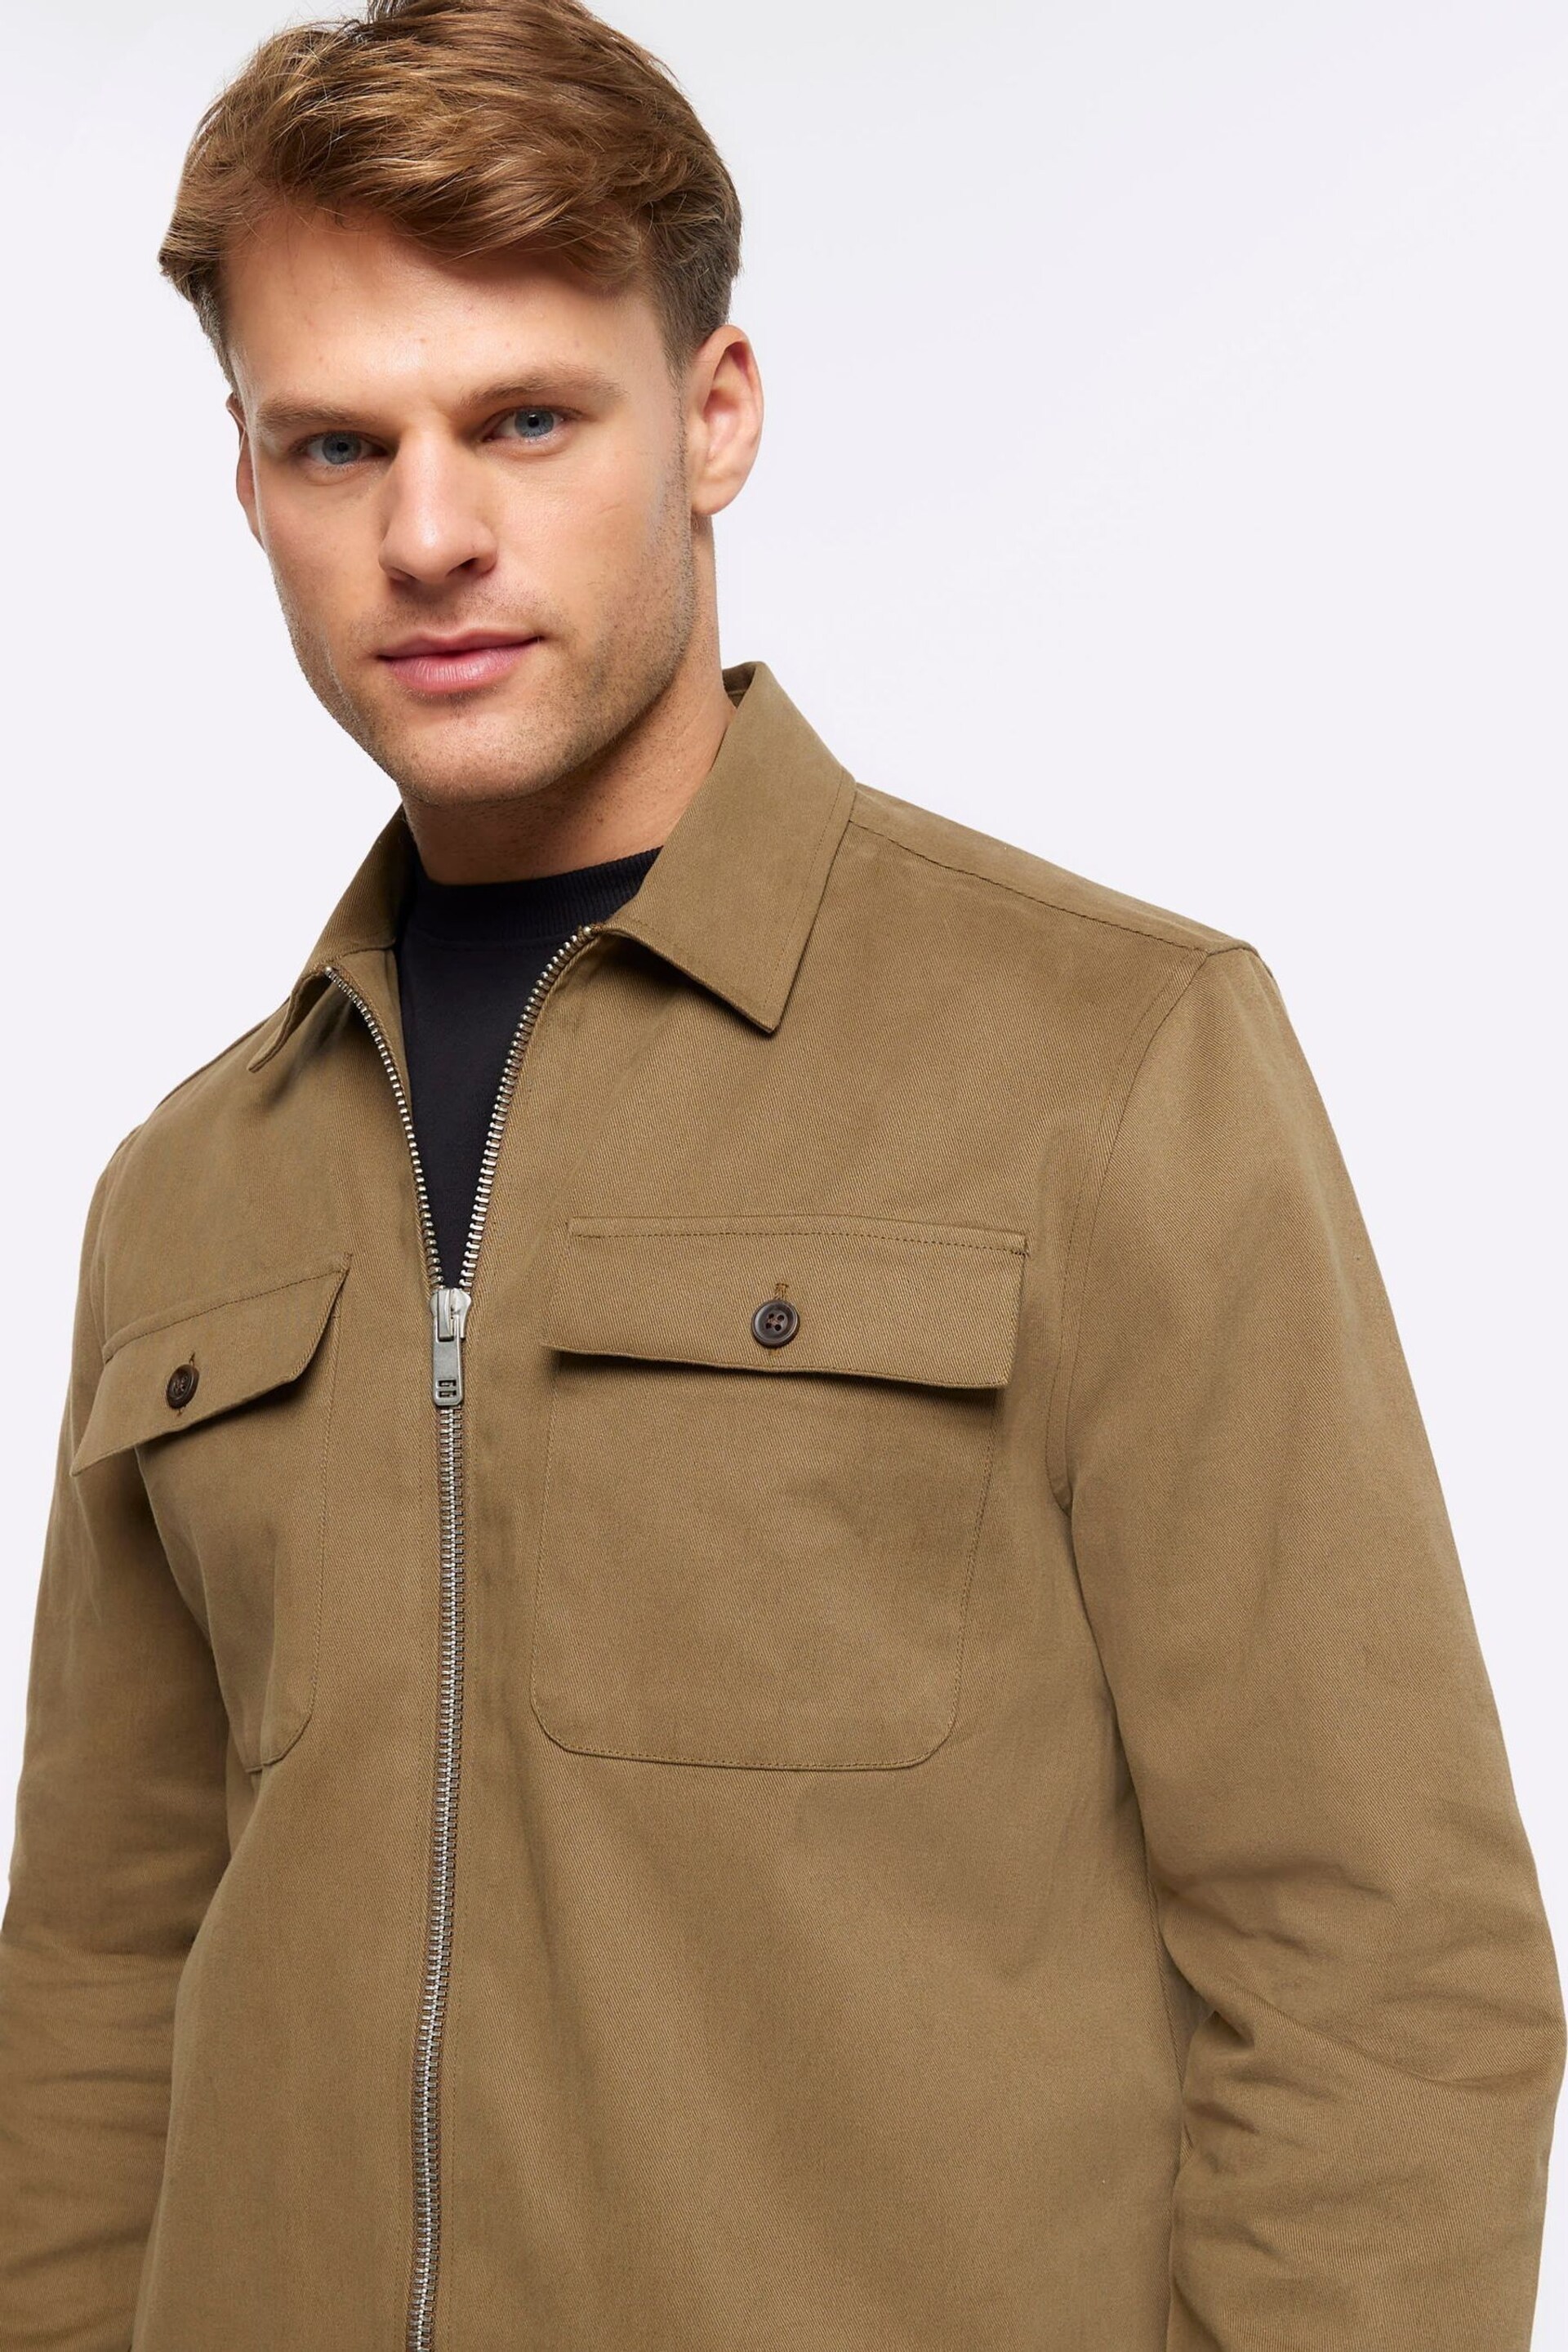 River Island Brown Zipper Front Overshirt - Image 3 of 6